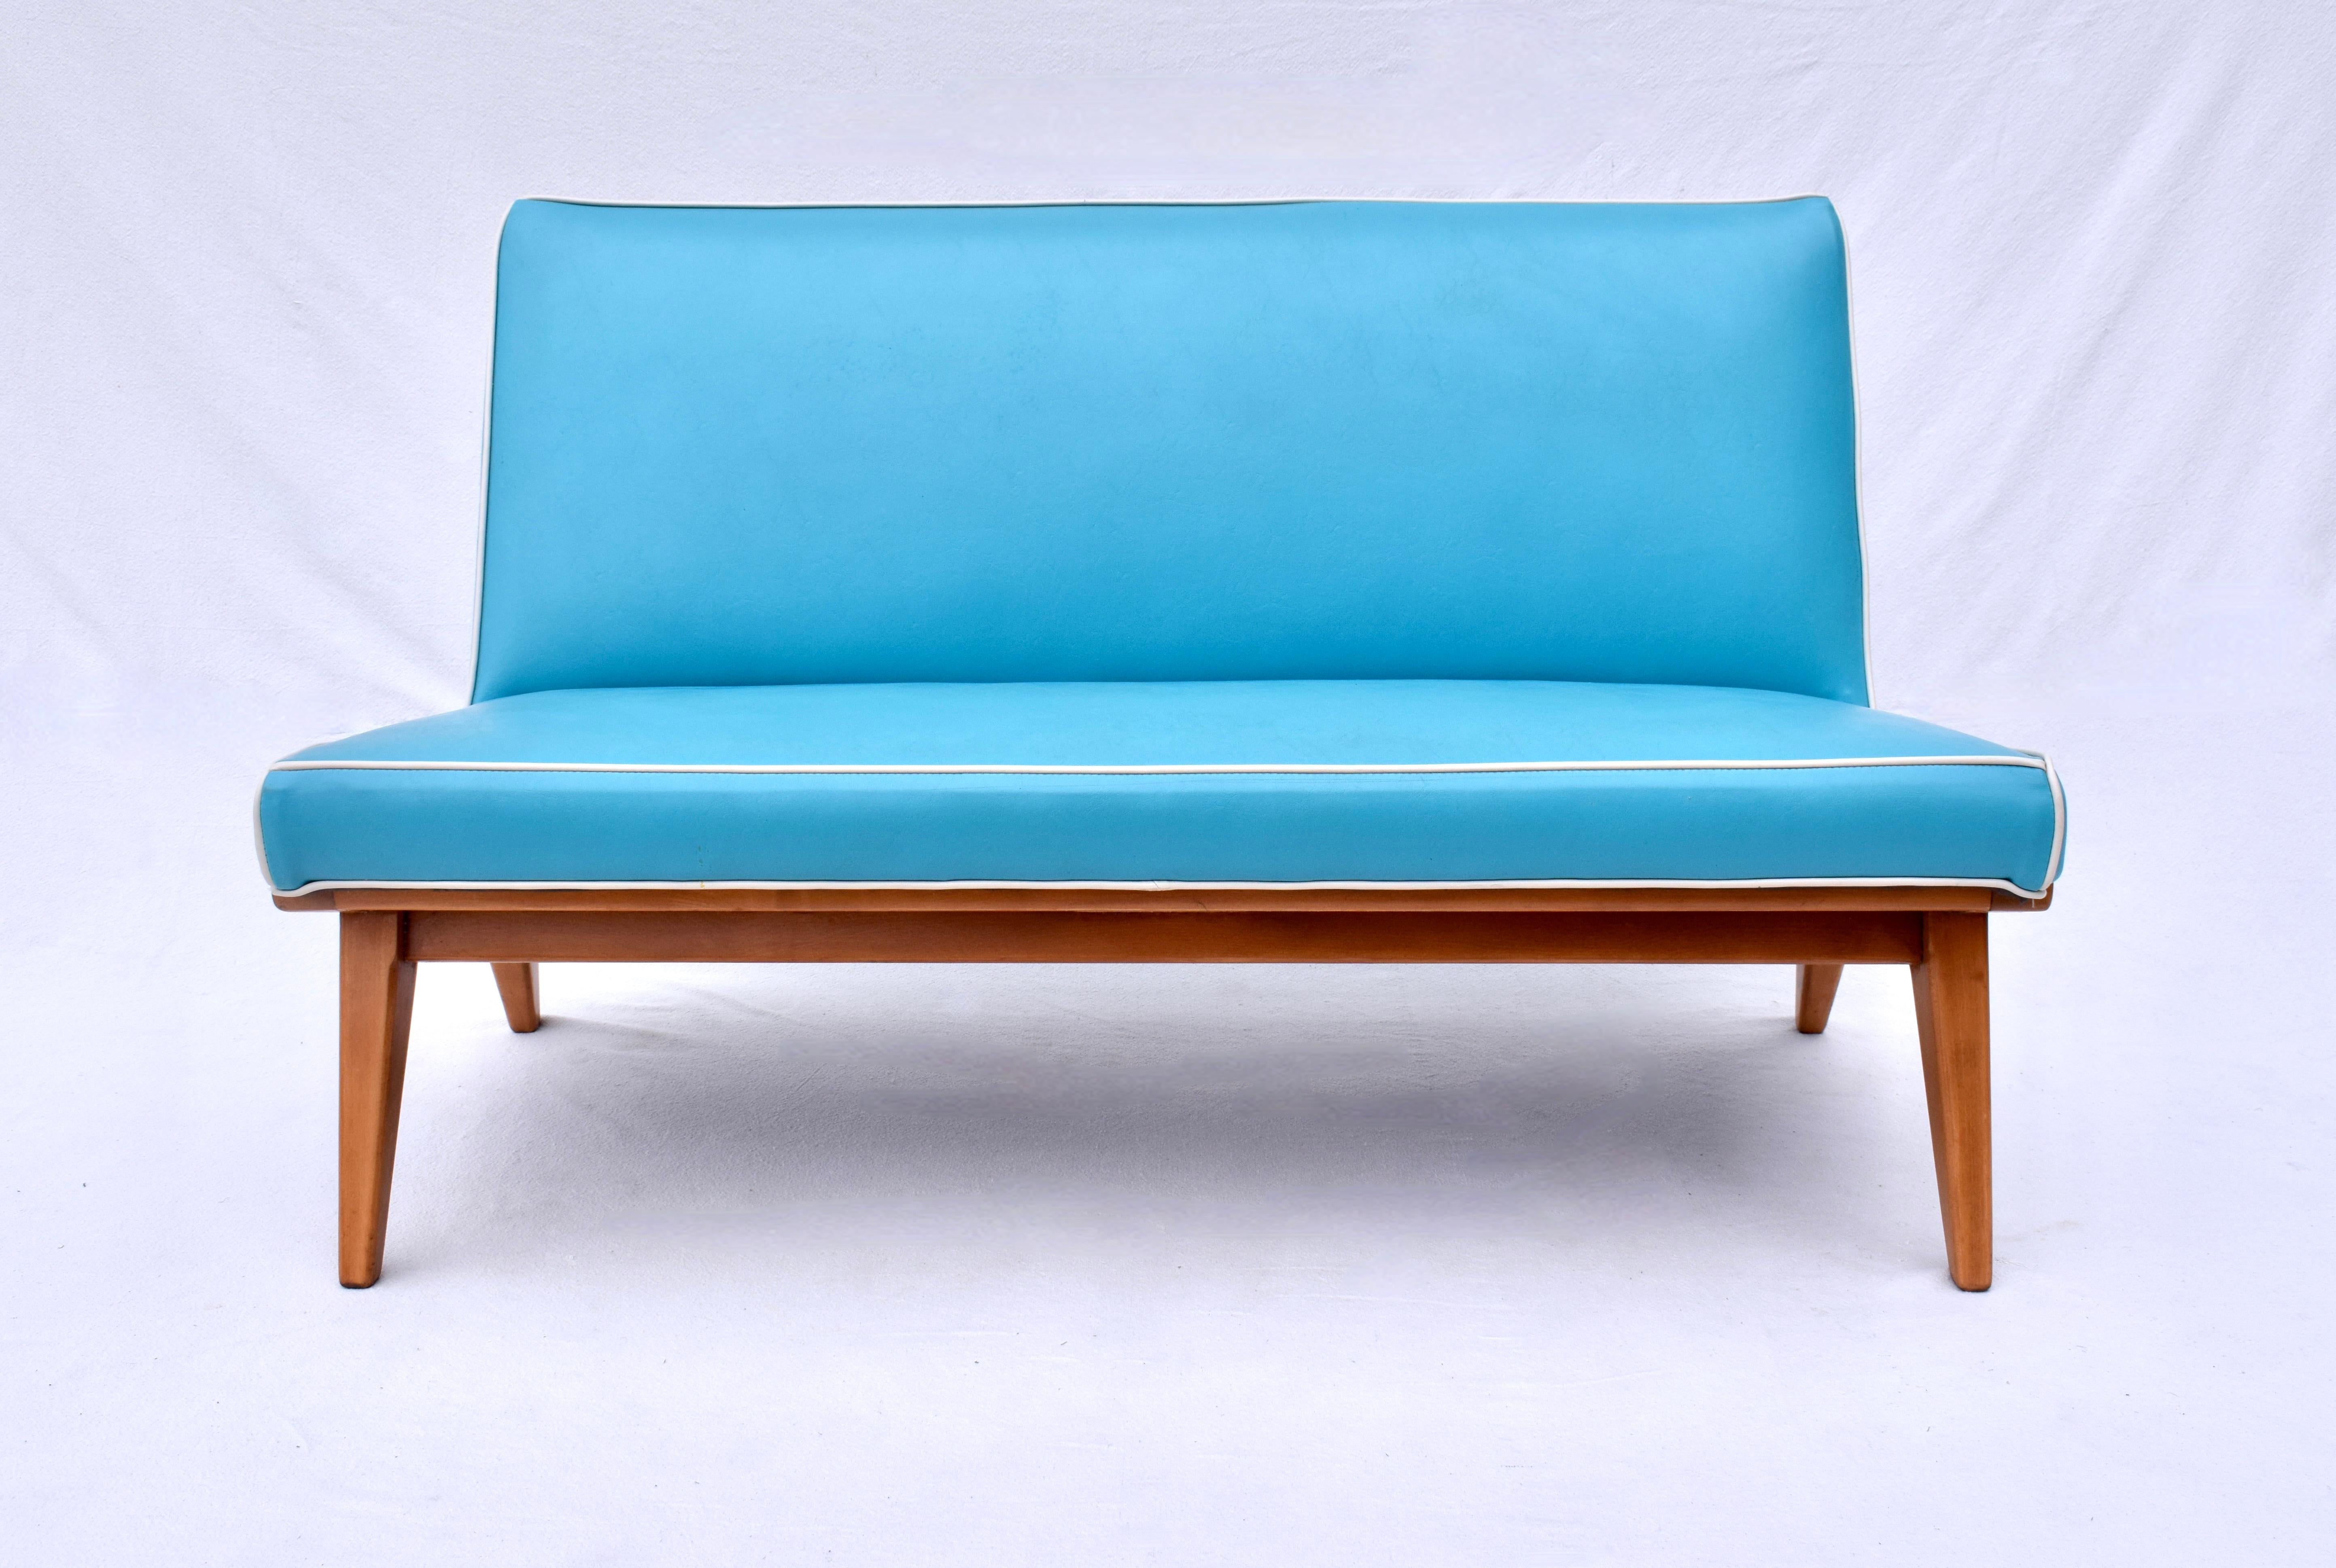 Classic early Knoll Associates sofa designed by Jens Risom in the early 1940s. Solid birch base with sleek angled and tapering legs support a comfortable cantilevered seat with original springs. Restoration in the early 2000's upholstered in